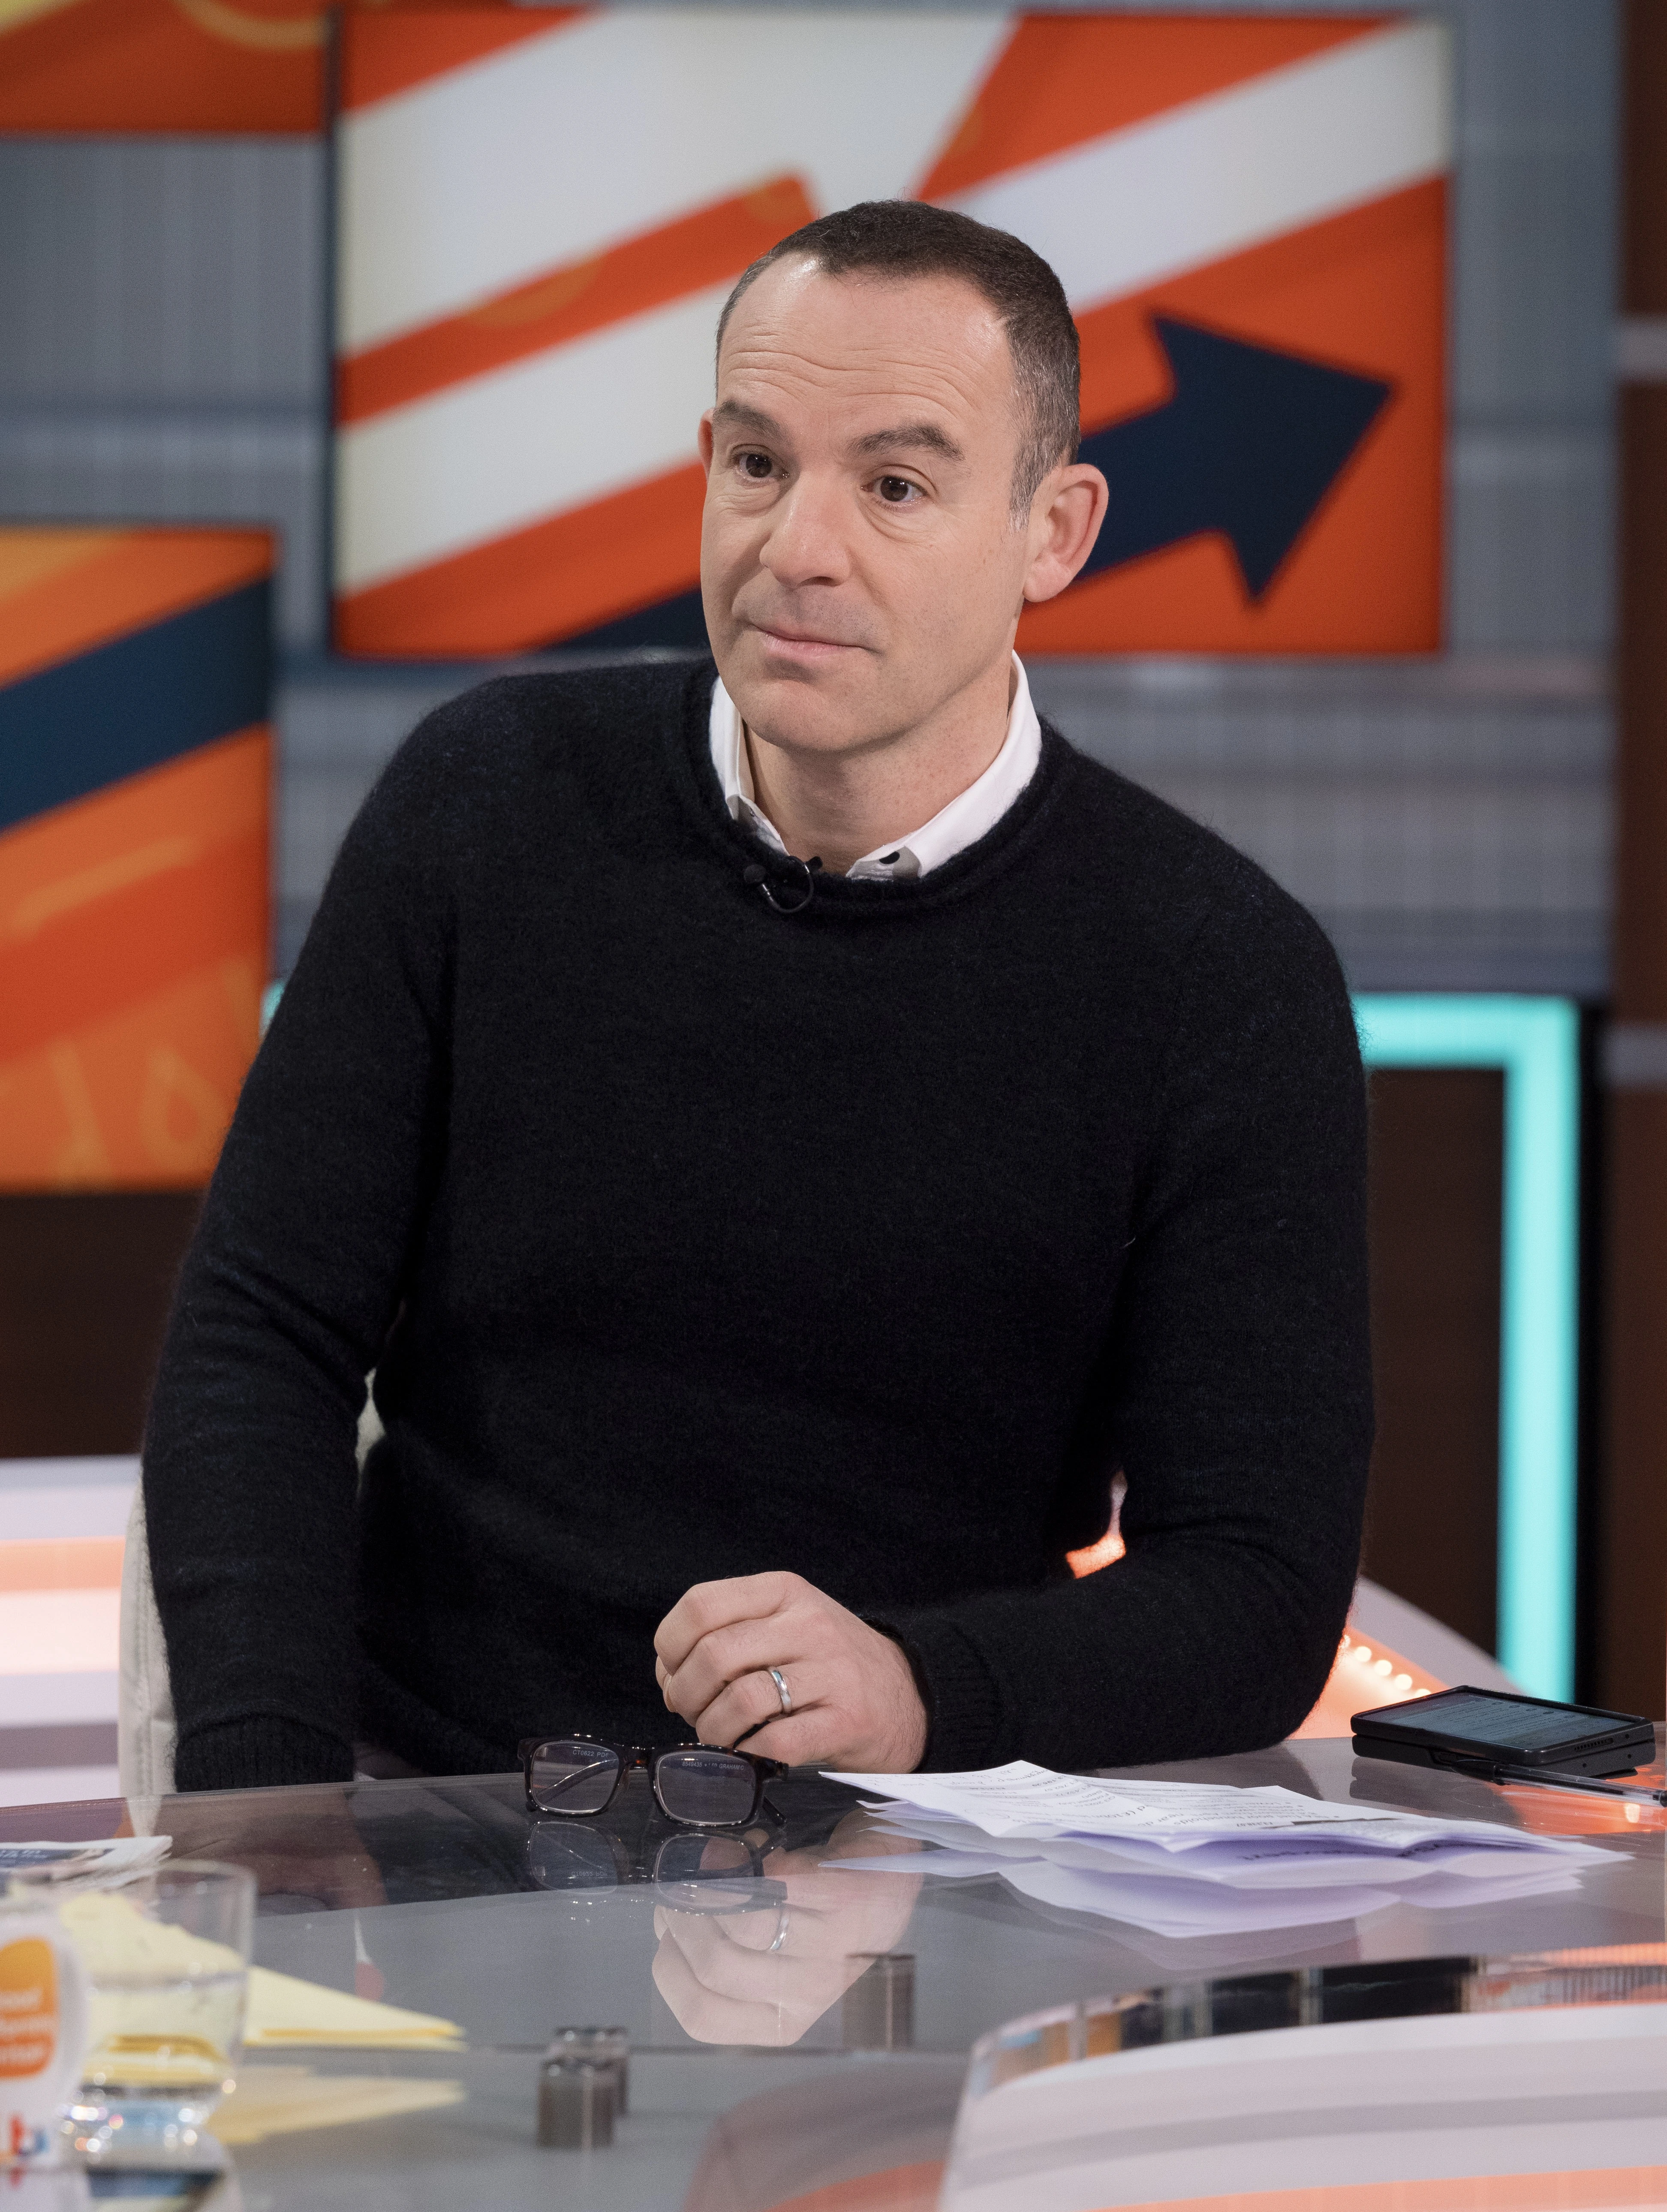 Martin Lewis slams BBC amid cost of living crisis during This Morning appearance